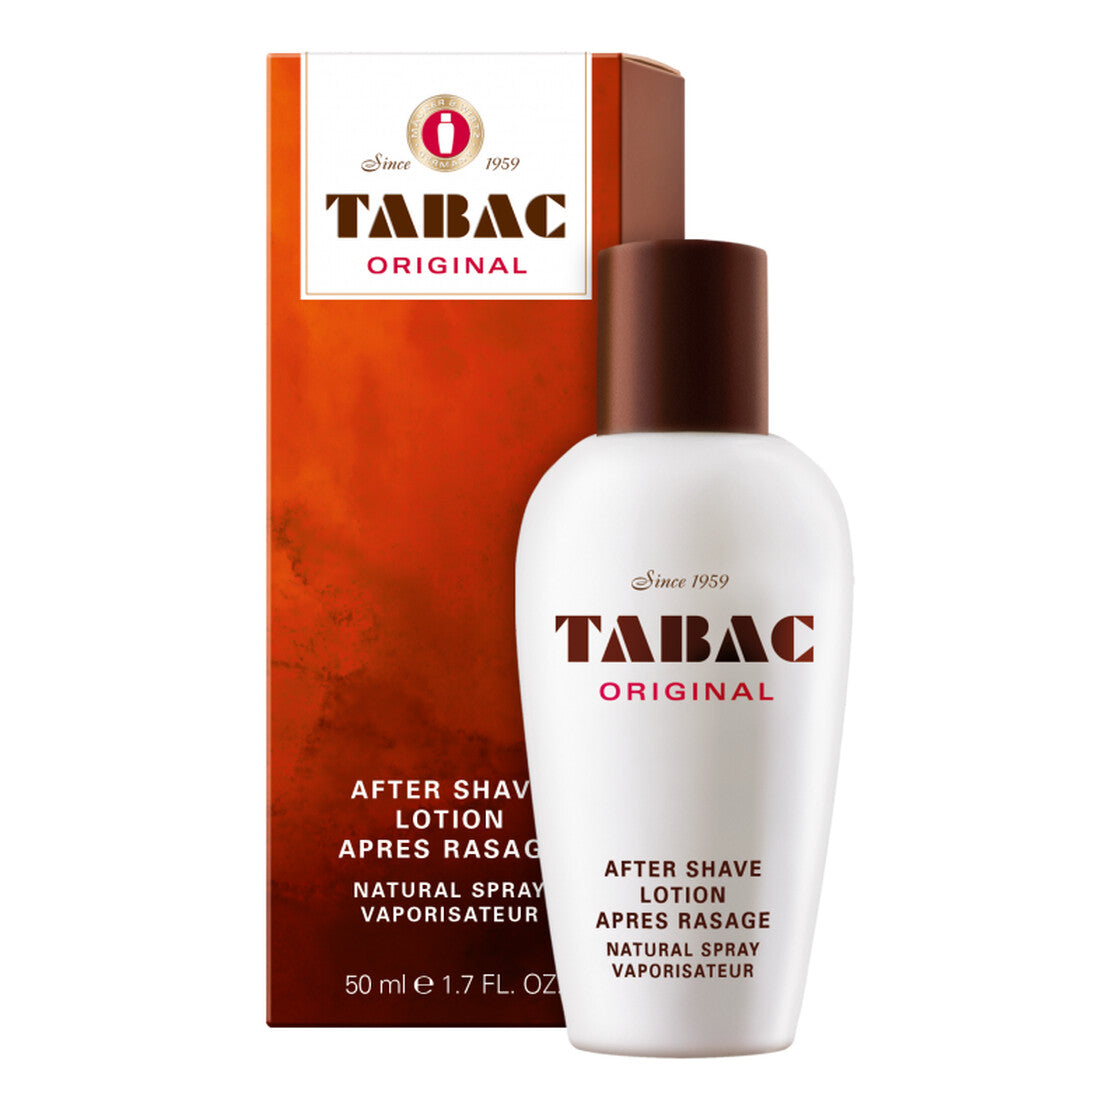 Cyril R. Salter | Trade Suppliers of Luxury Grooming Products - Tabac Aftershave Spray 50ml 431045